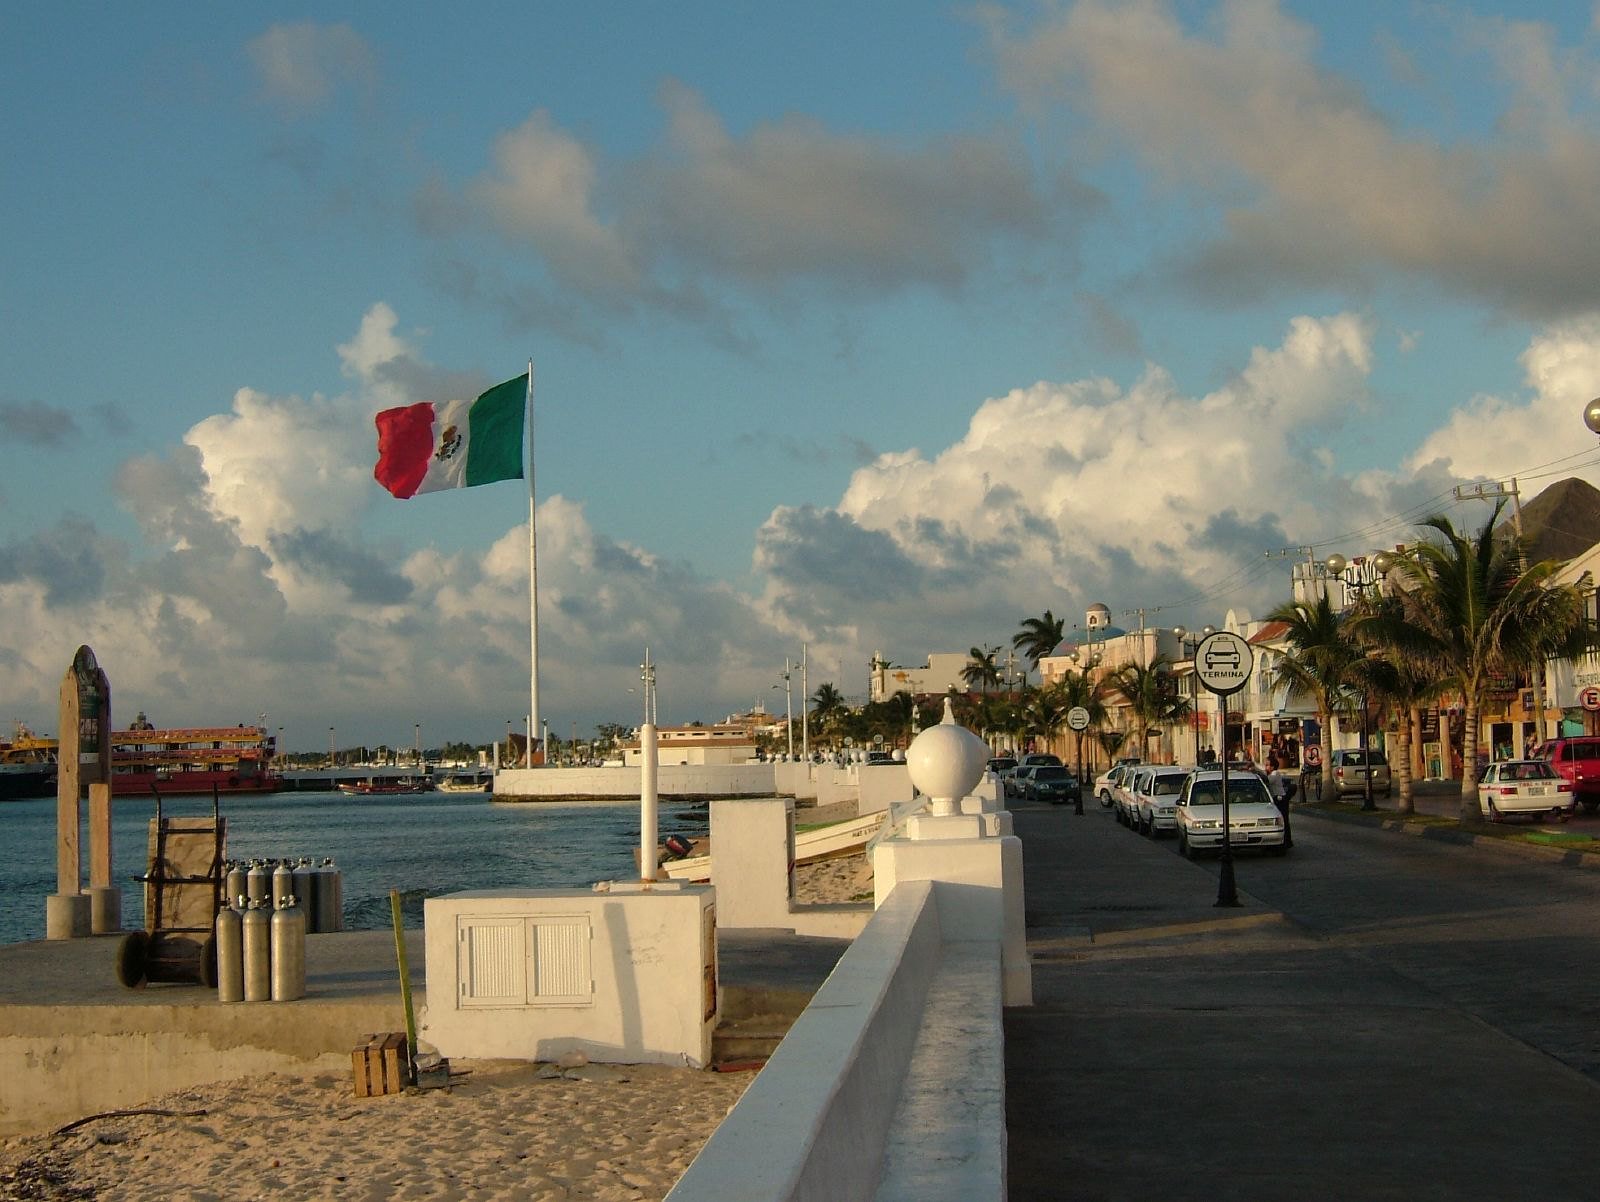 Cozumel floats idea of being homeport for cruise ships | Royal Caribbean Blog